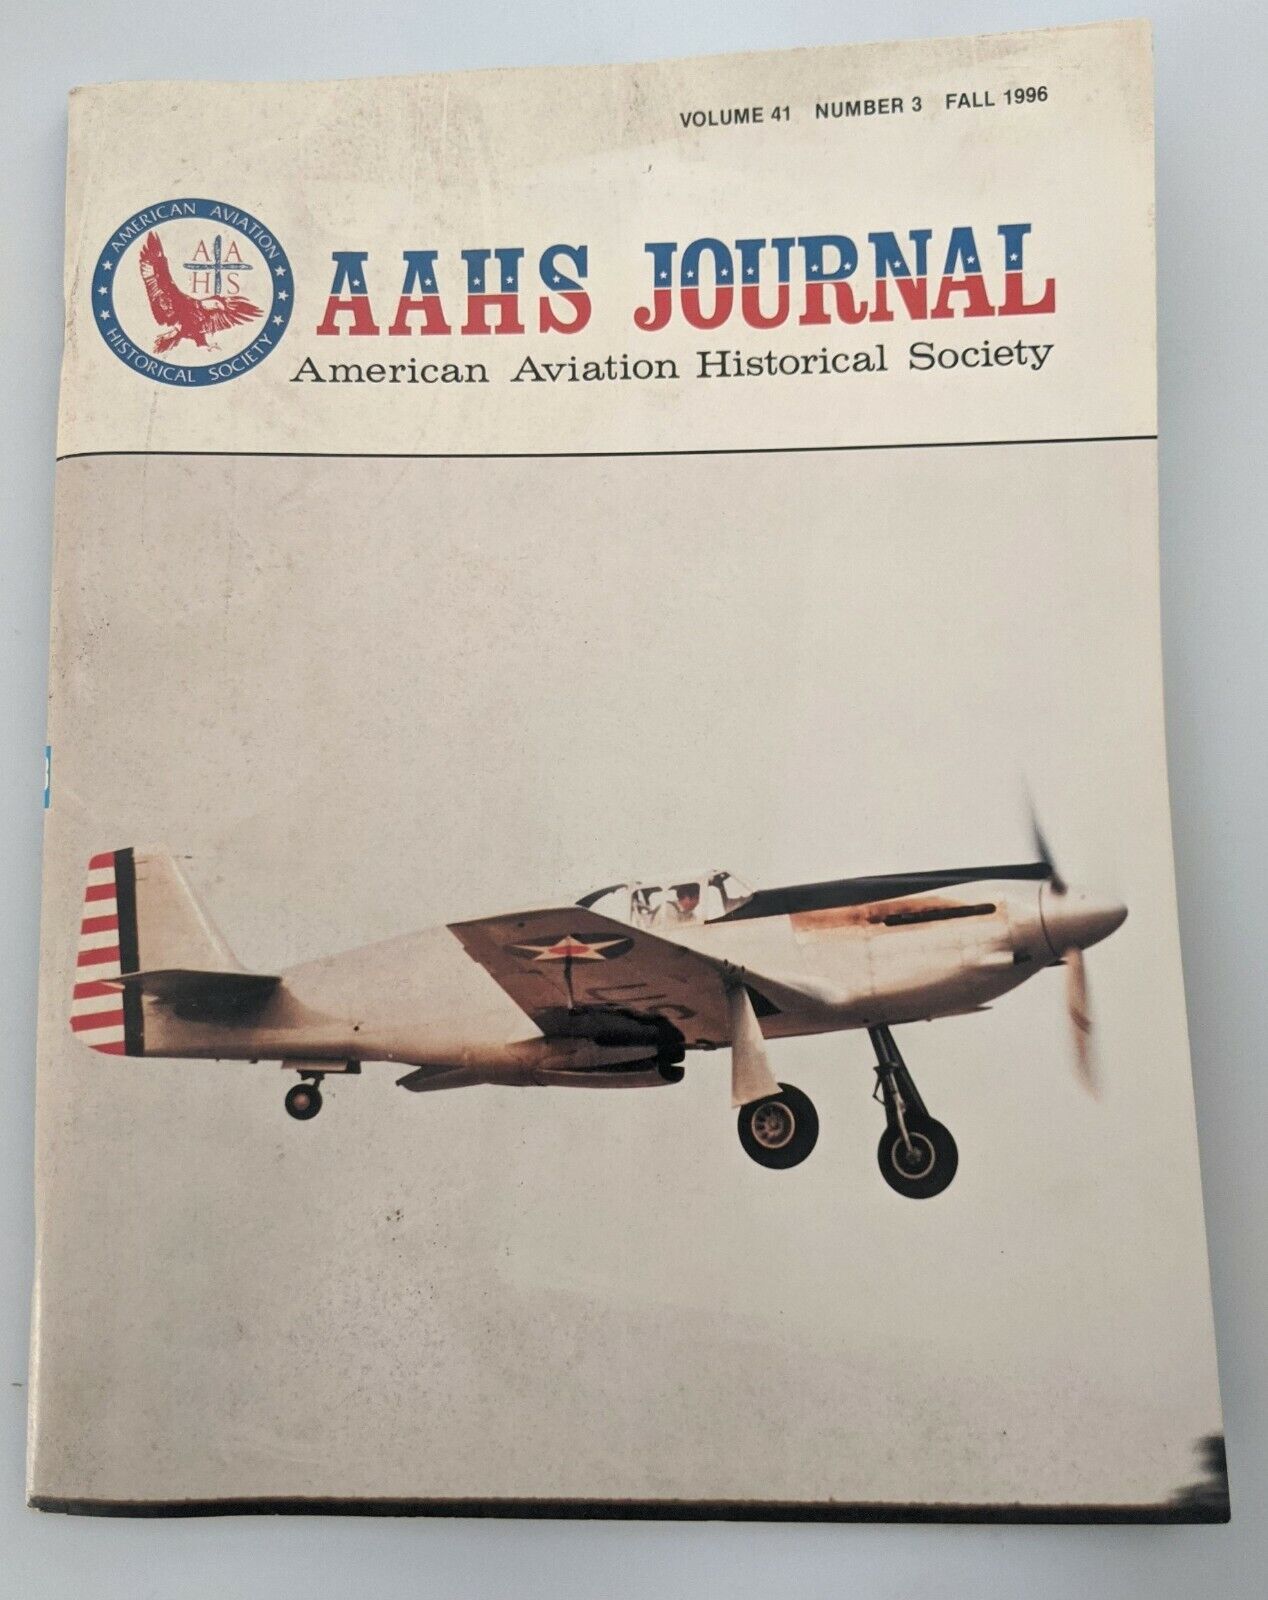 AAHS Journal - American Aviation Historical Society - Vol 41 Number 3 Fall 1996